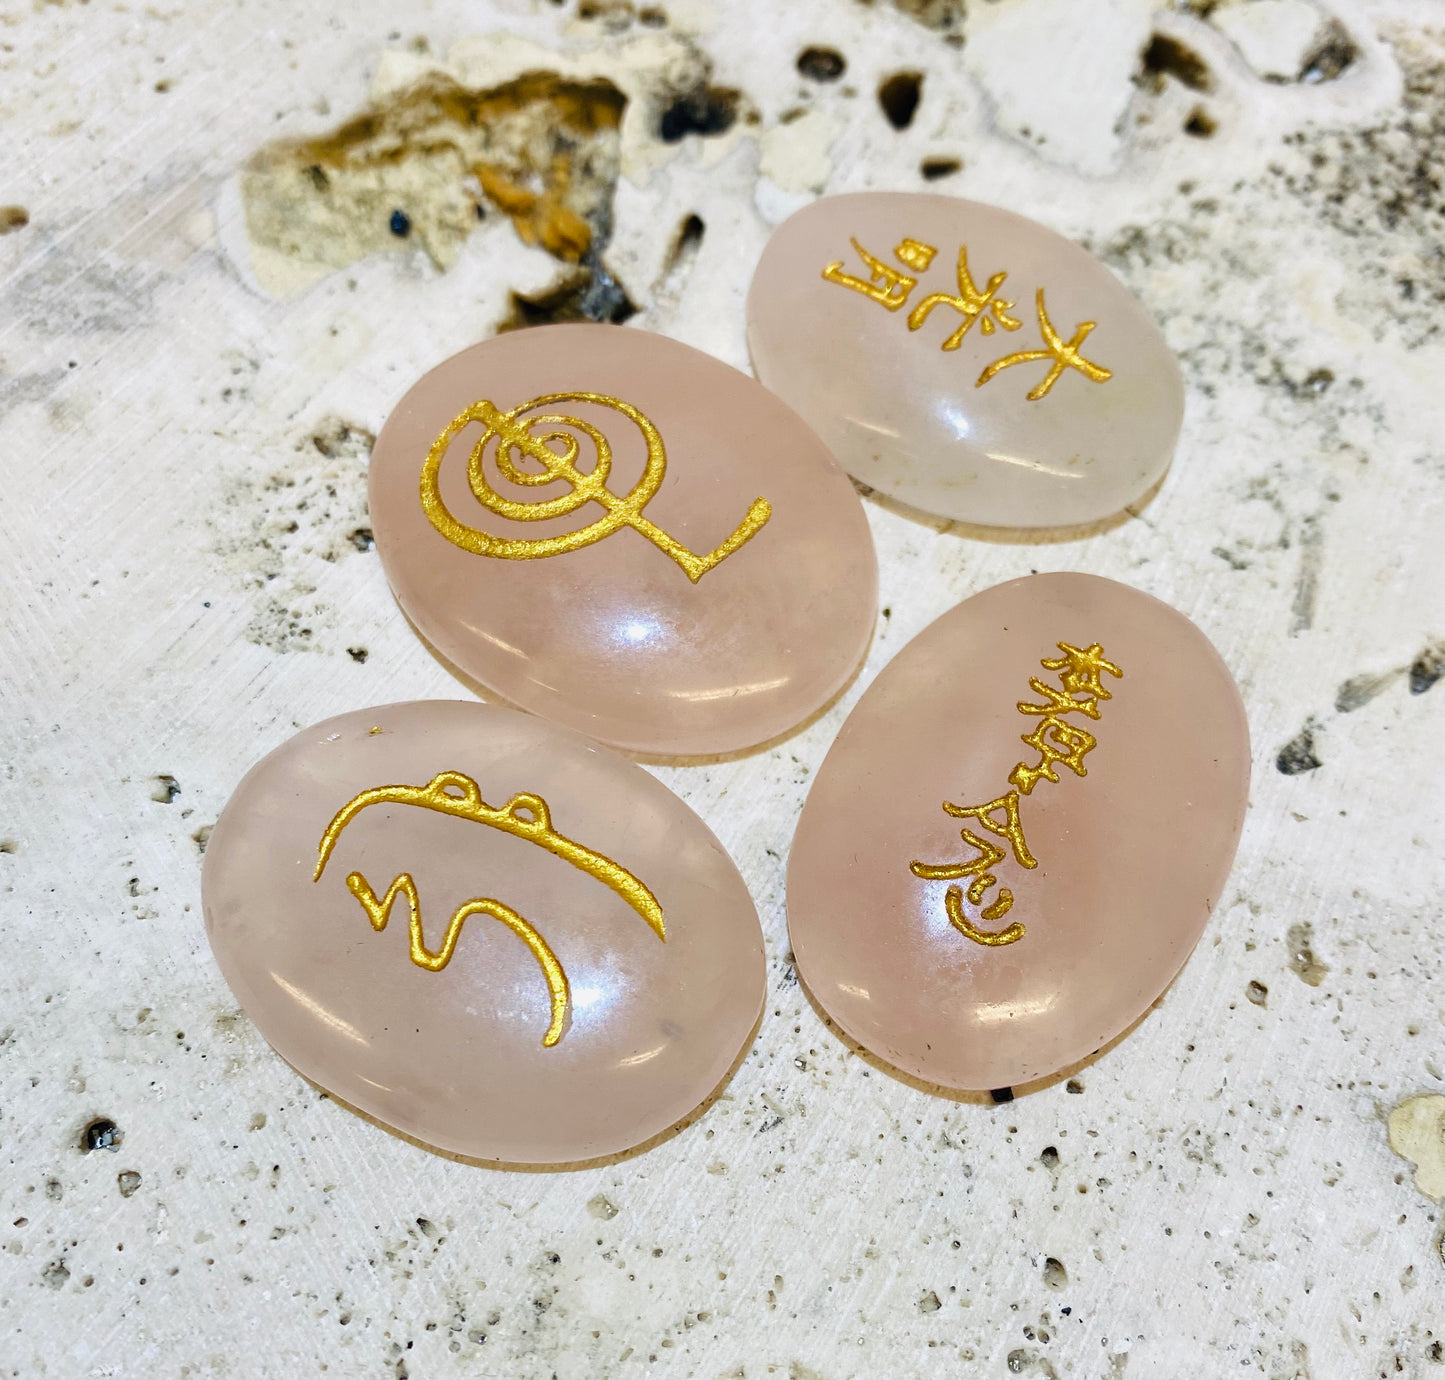 Set of 4 Hand Engraved Reiki Symbol Stone for body workers - Available in 5 stones